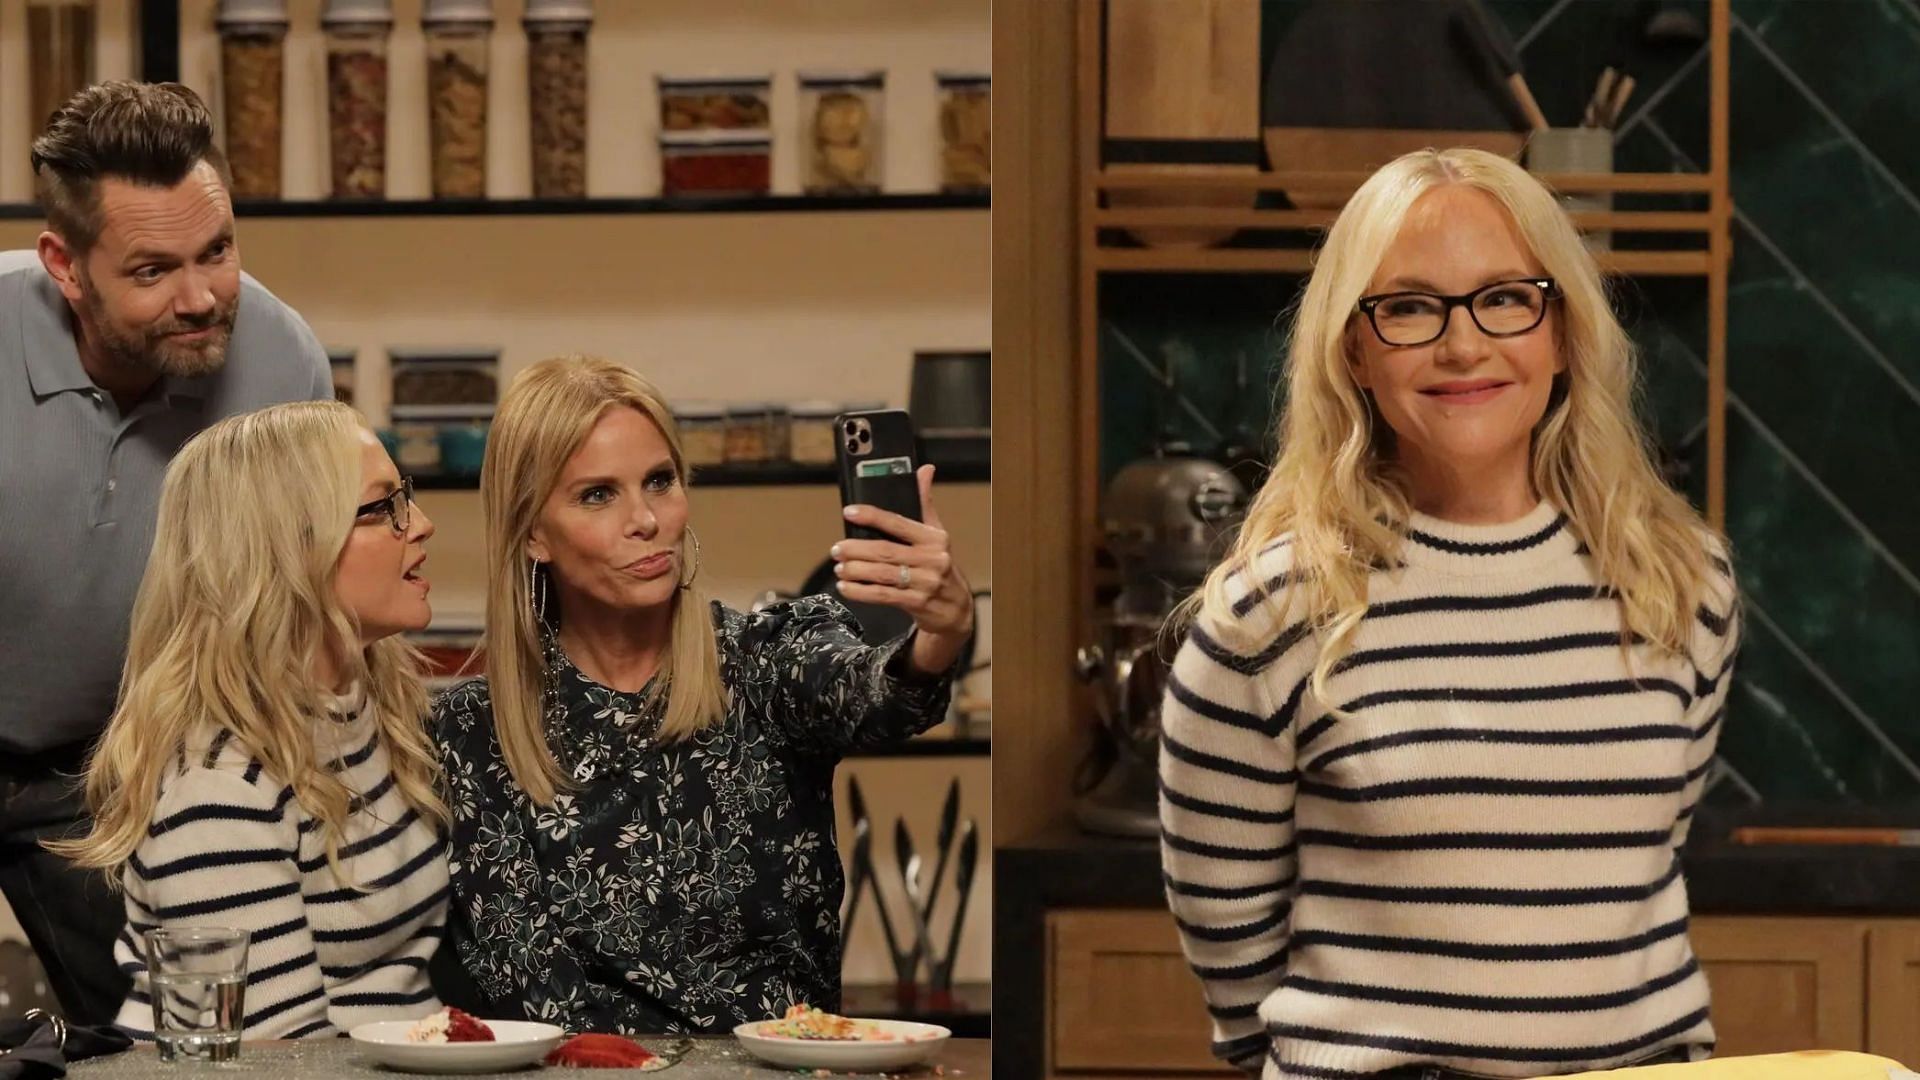 Cheryl Hines and Rachael Harris to go compete head-to-head in Celebrity Beef hosted by Joel McHale (Image via Instagram/@eentertainment)